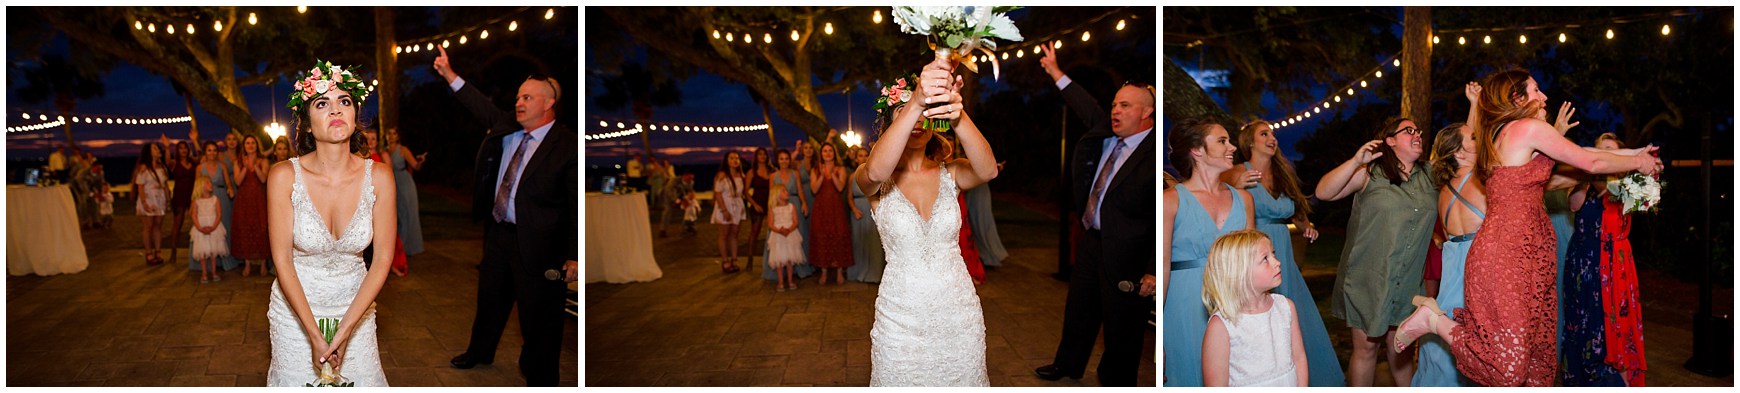 Wedding at Destin Bay House_Indie Pearl Photography_Katie and Andrew_0067.jpg